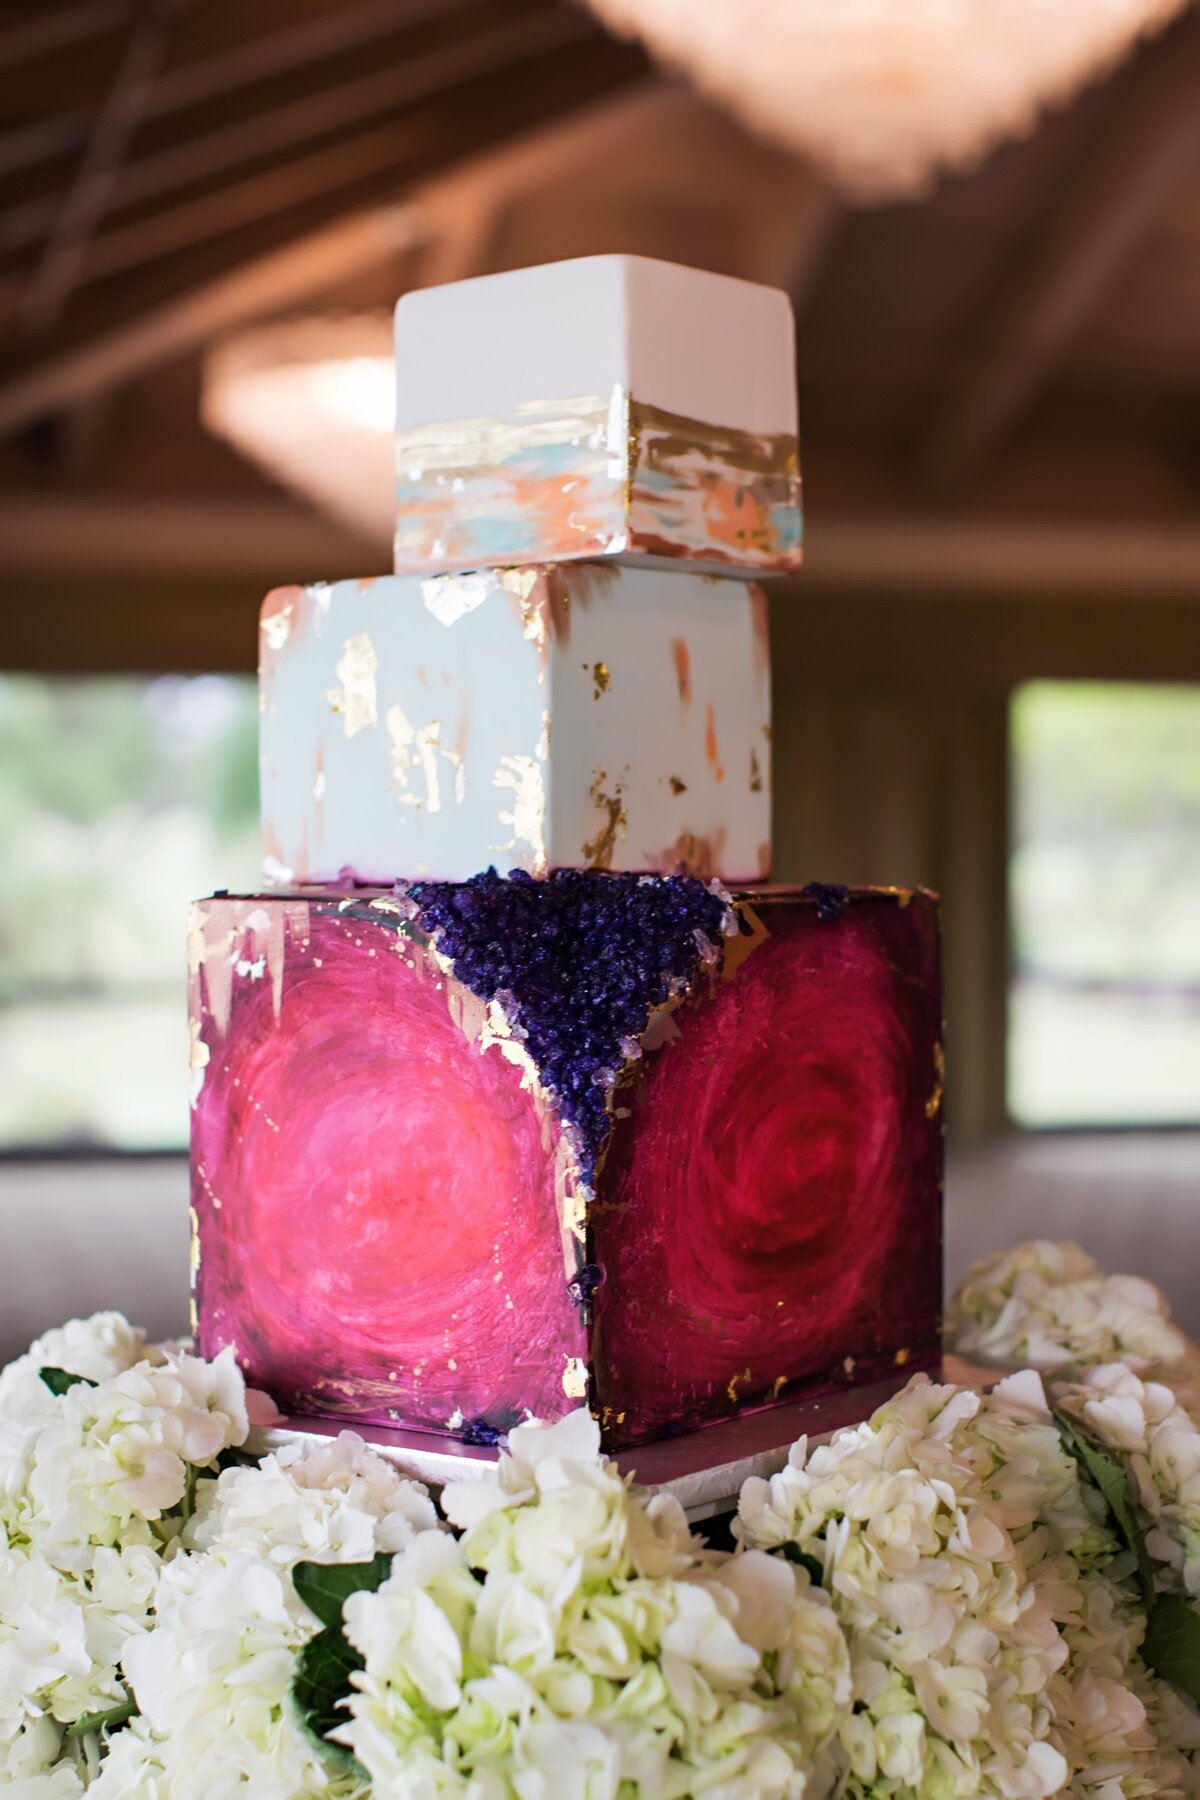 Fun and Unique Category - Offset Squares with Handpainted Details and Geode - Limelight Photography.jpg